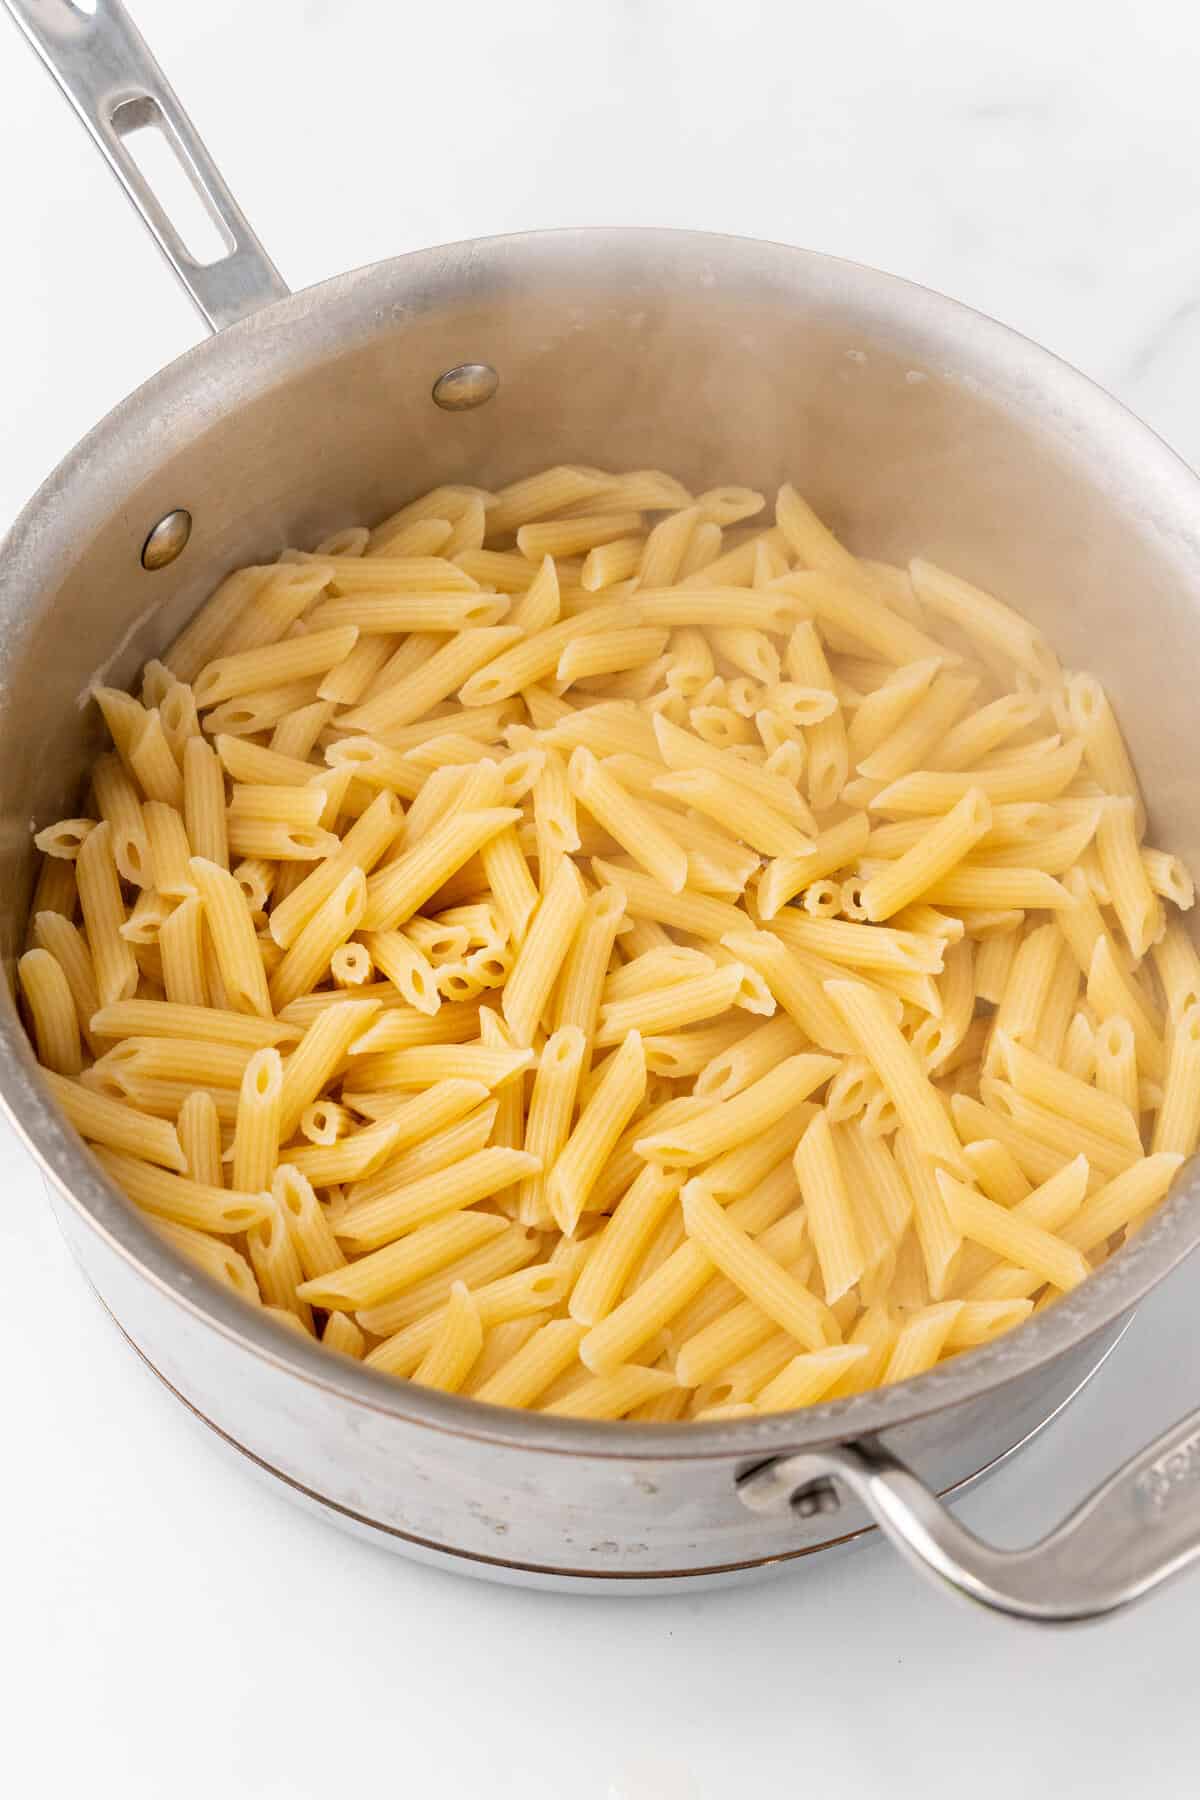 Penne pasta in a stainless steel pot.